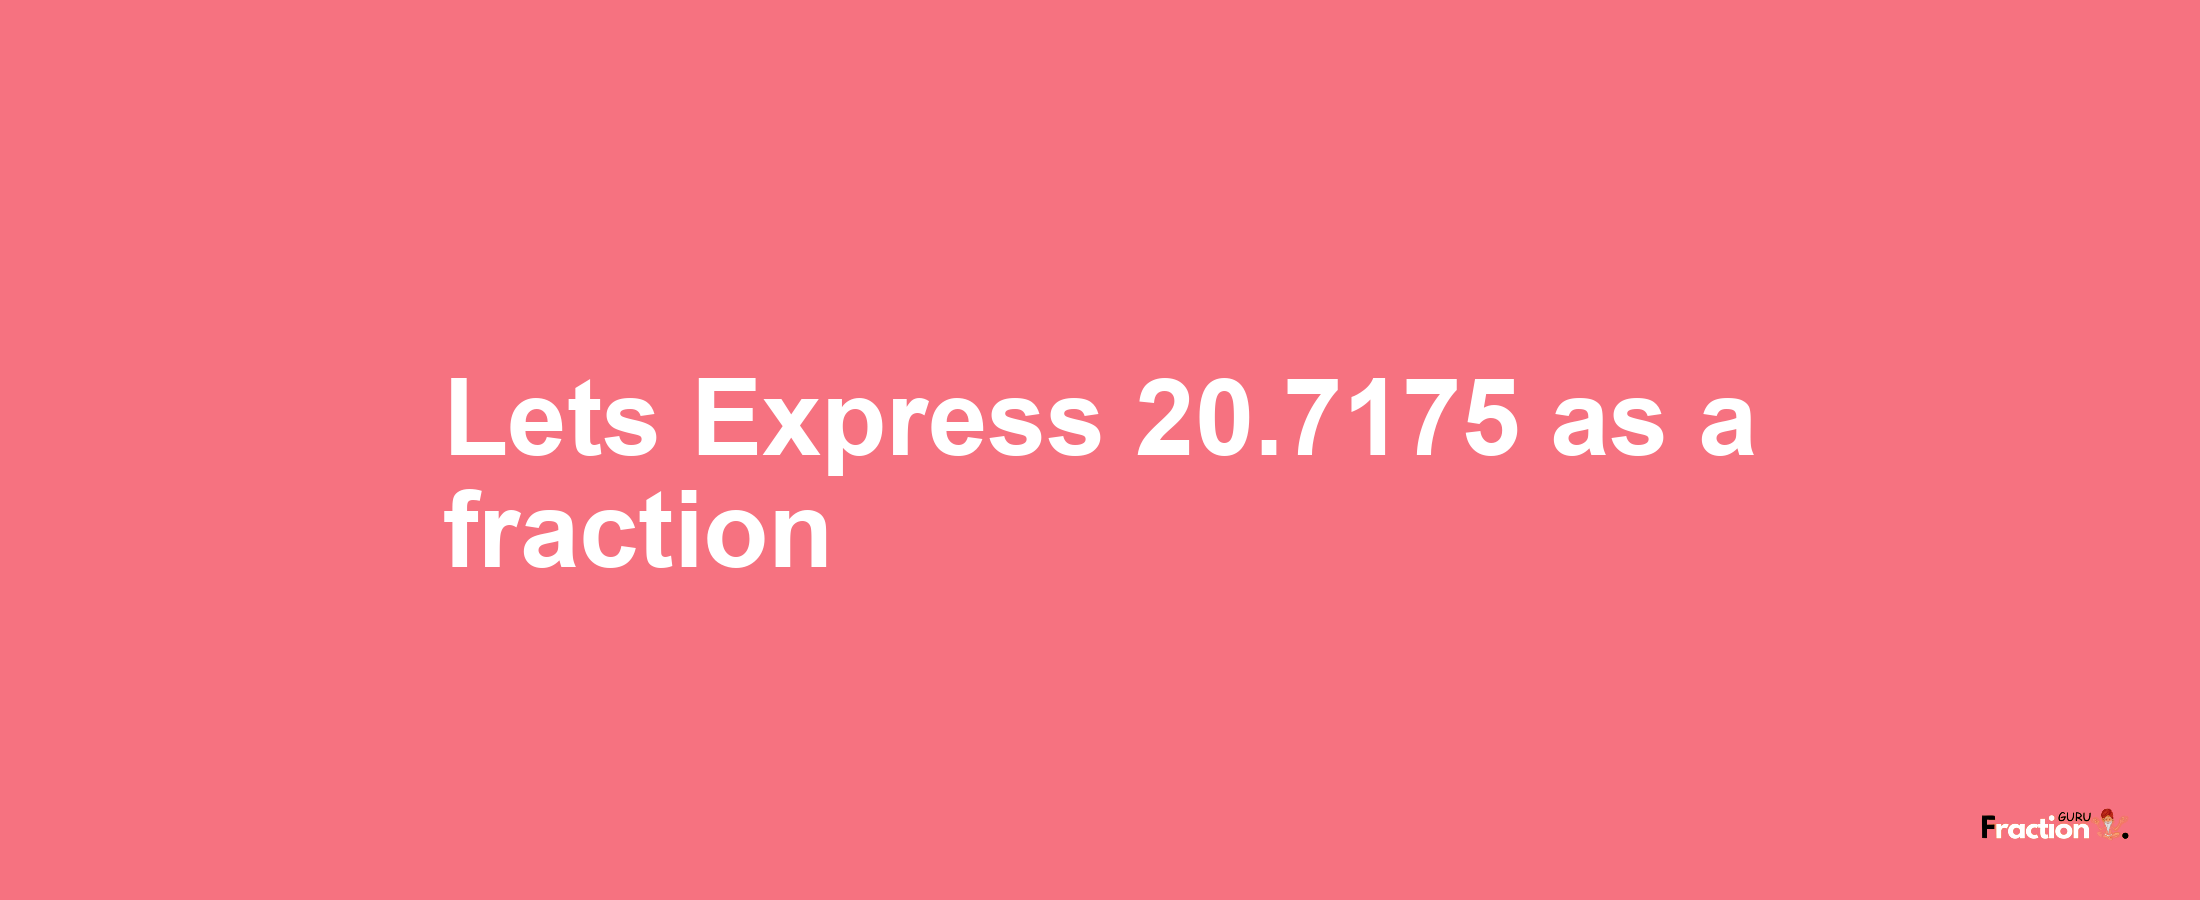 Lets Express 20.7175 as afraction